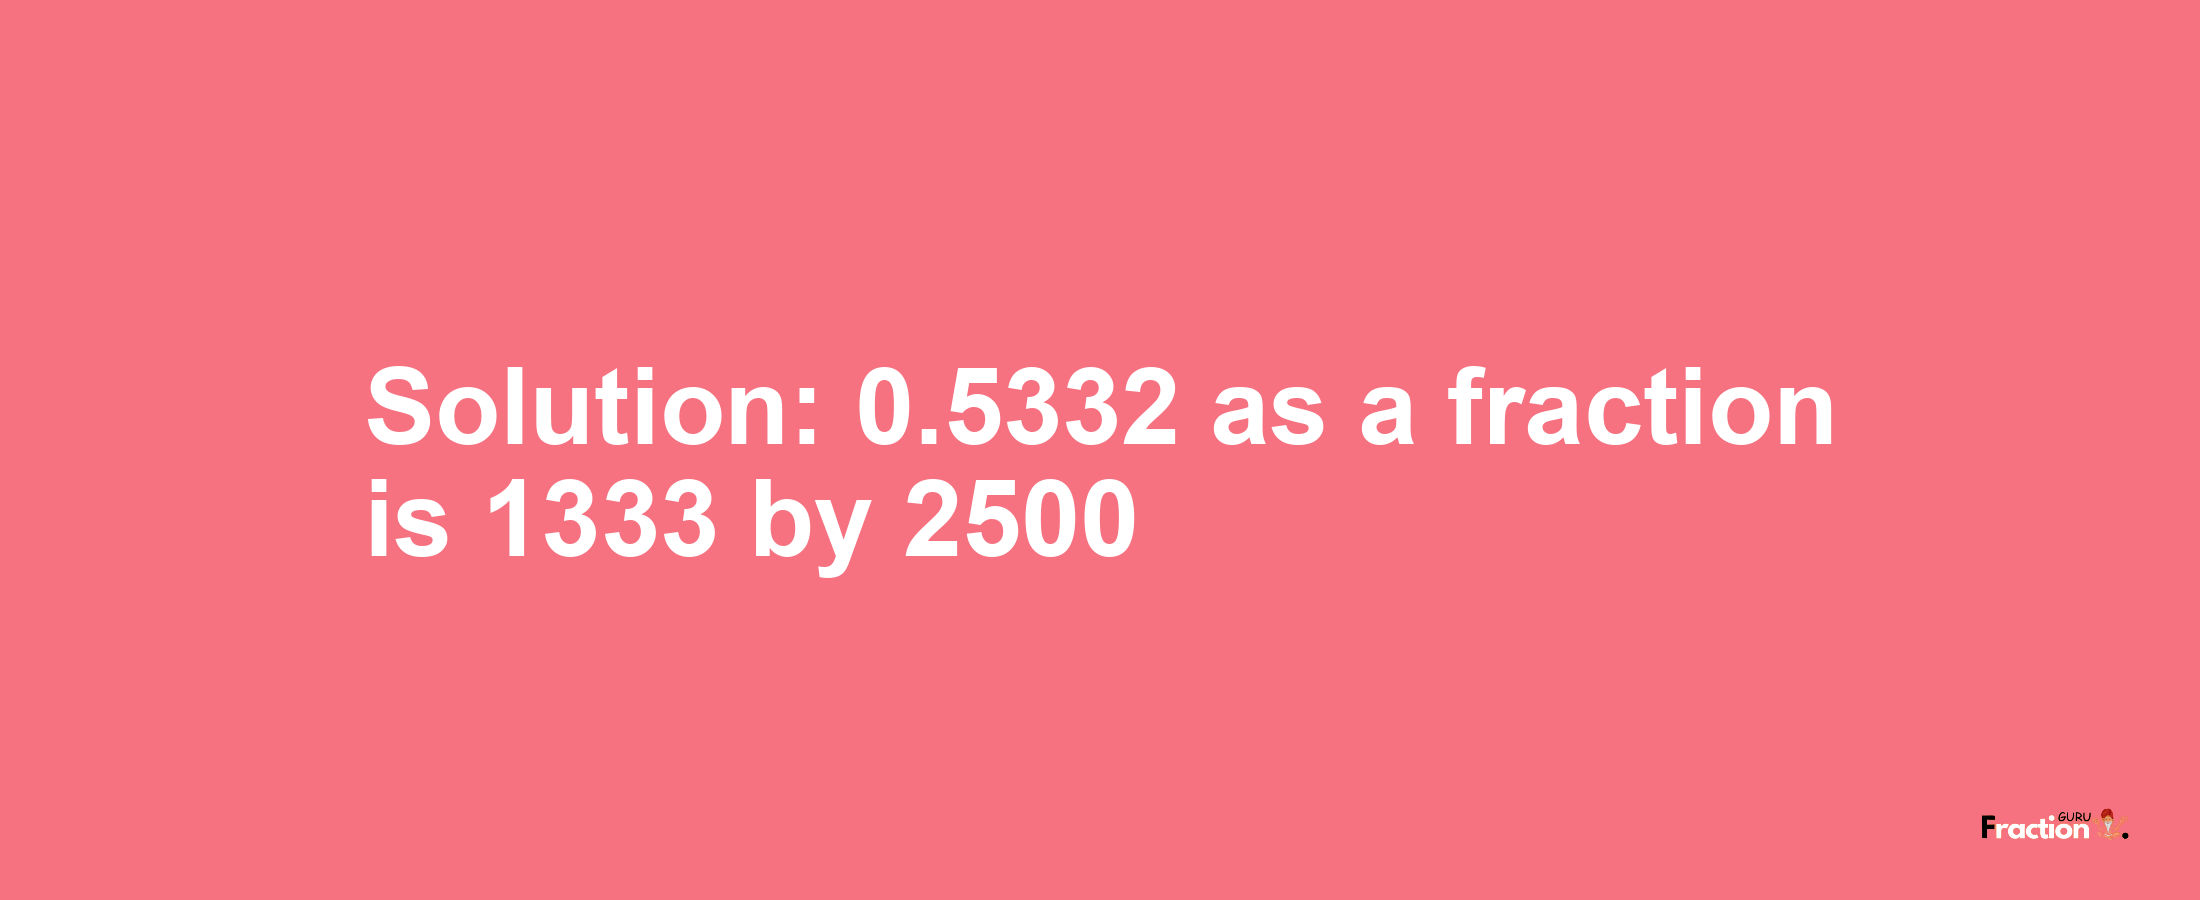 Solution:0.5332 as a fraction is 1333/2500